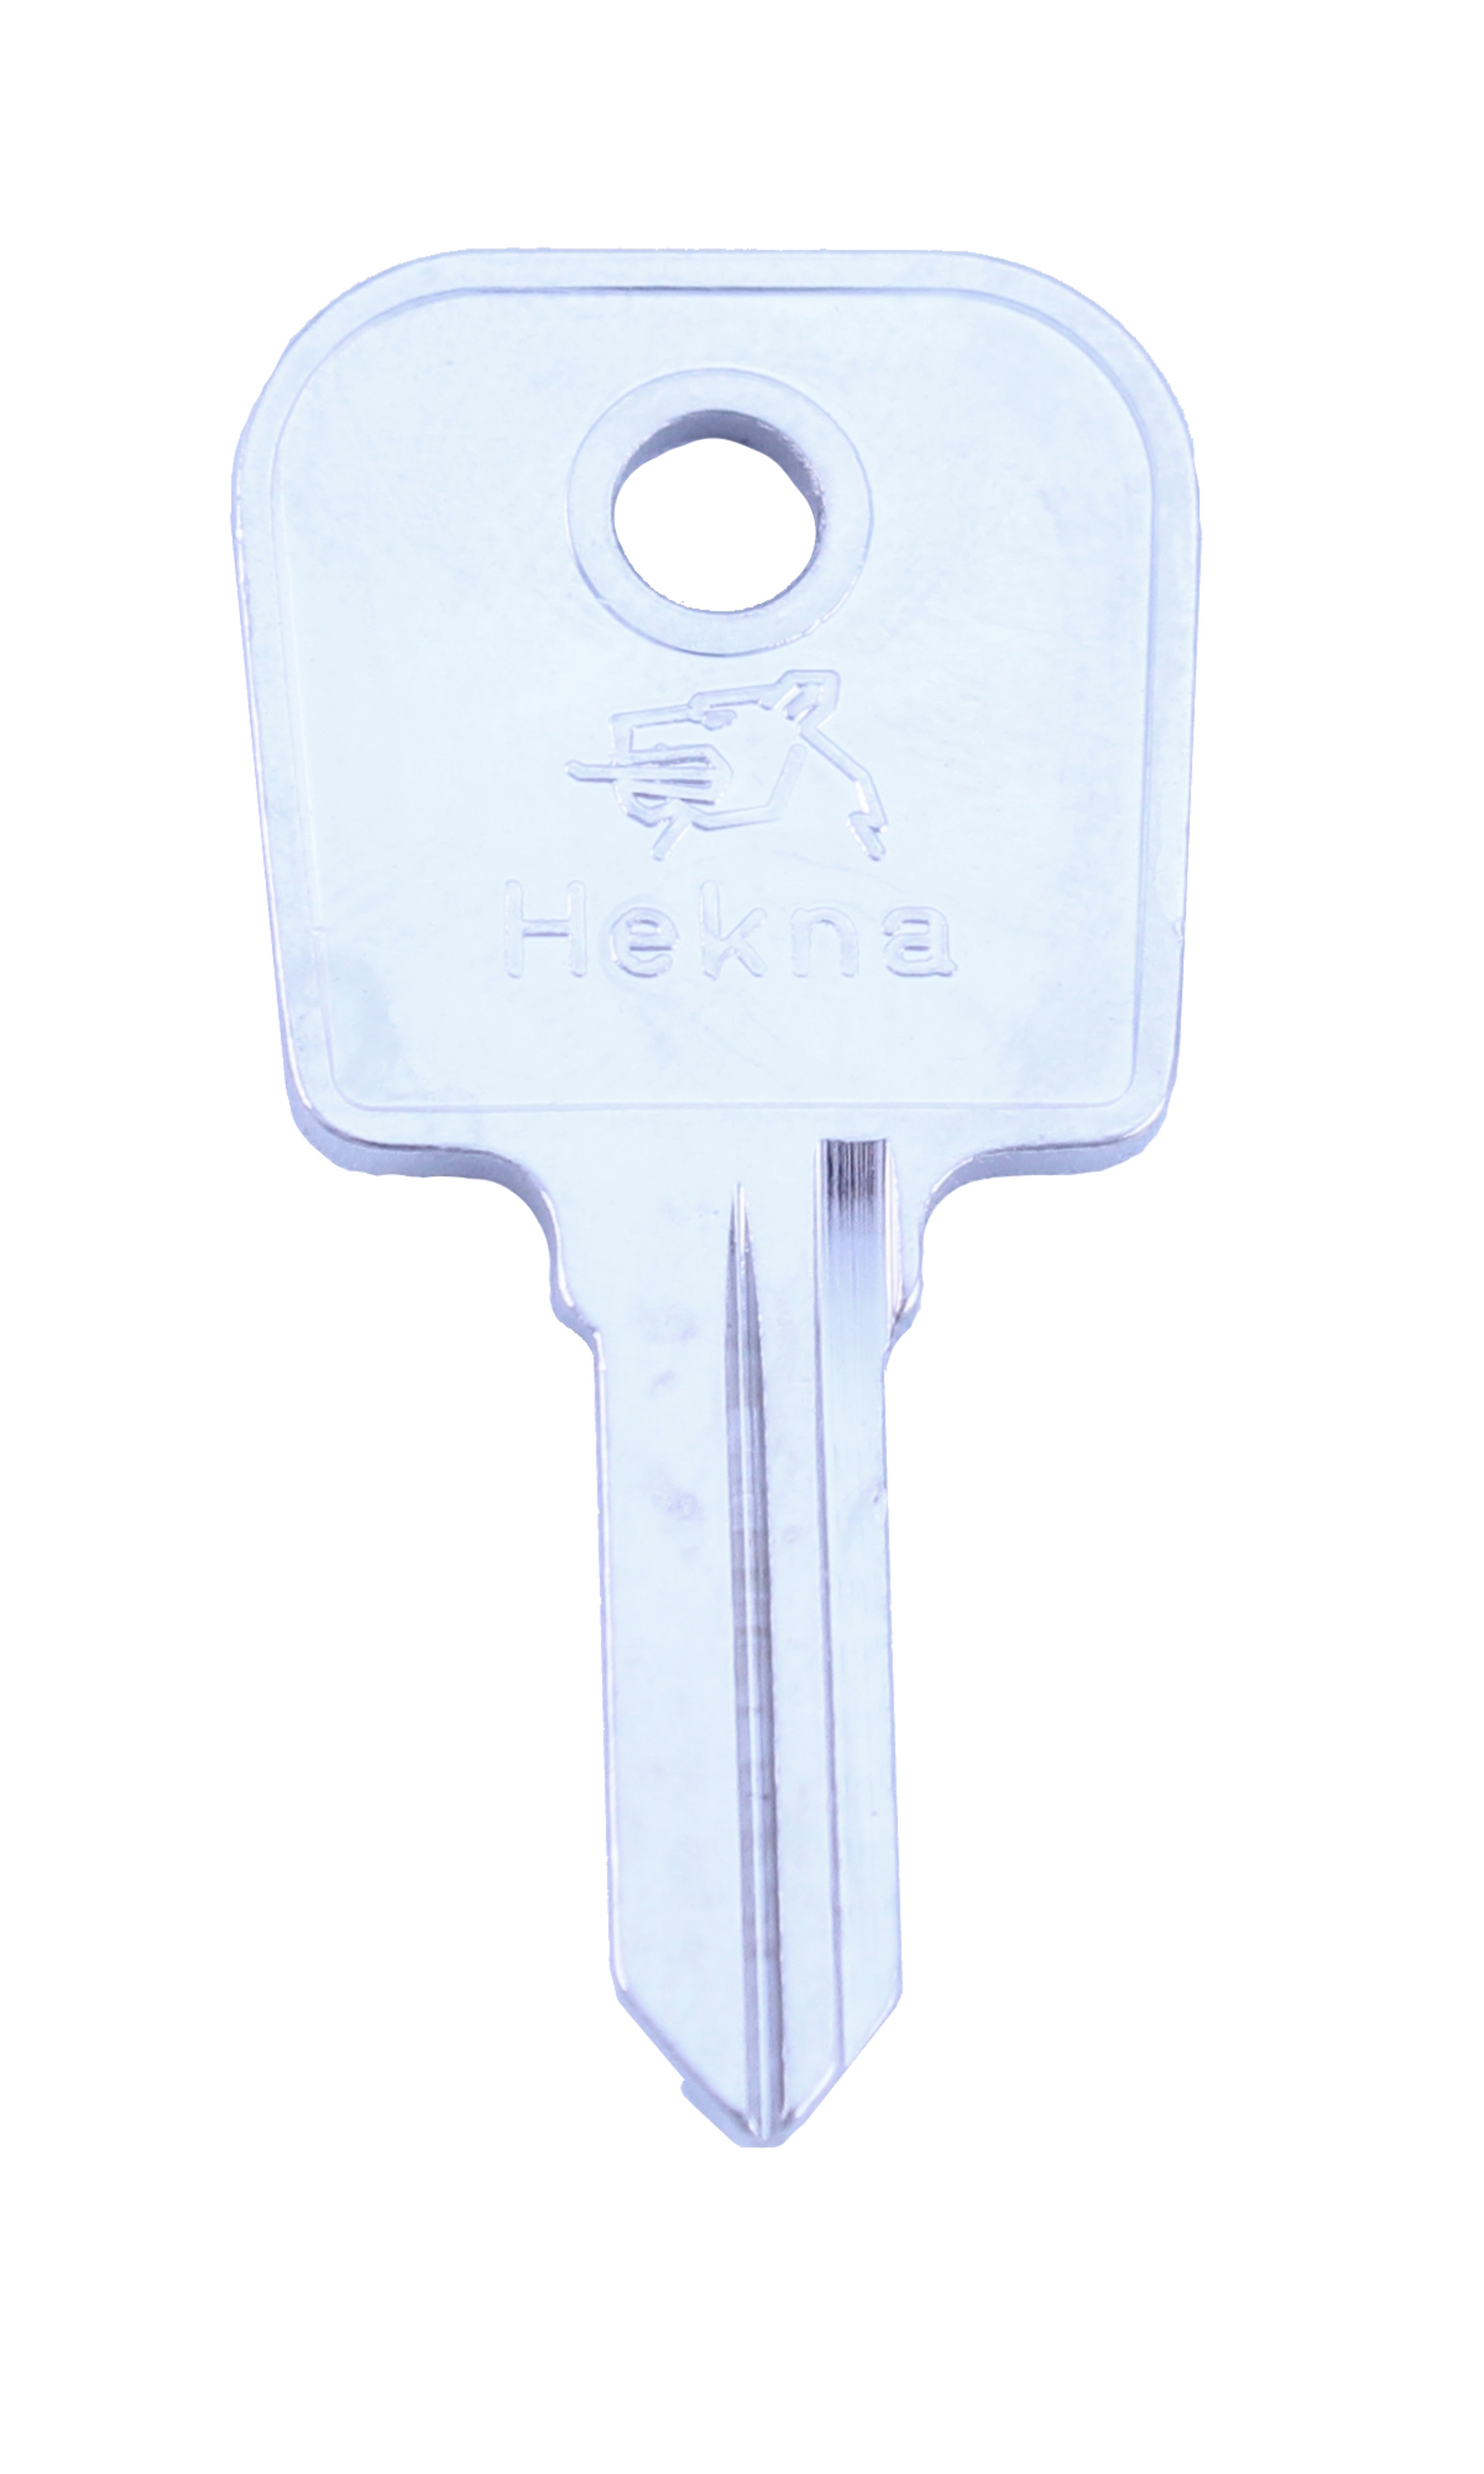 HEKNA Key - Serie 0301-0360 and 0401-0430